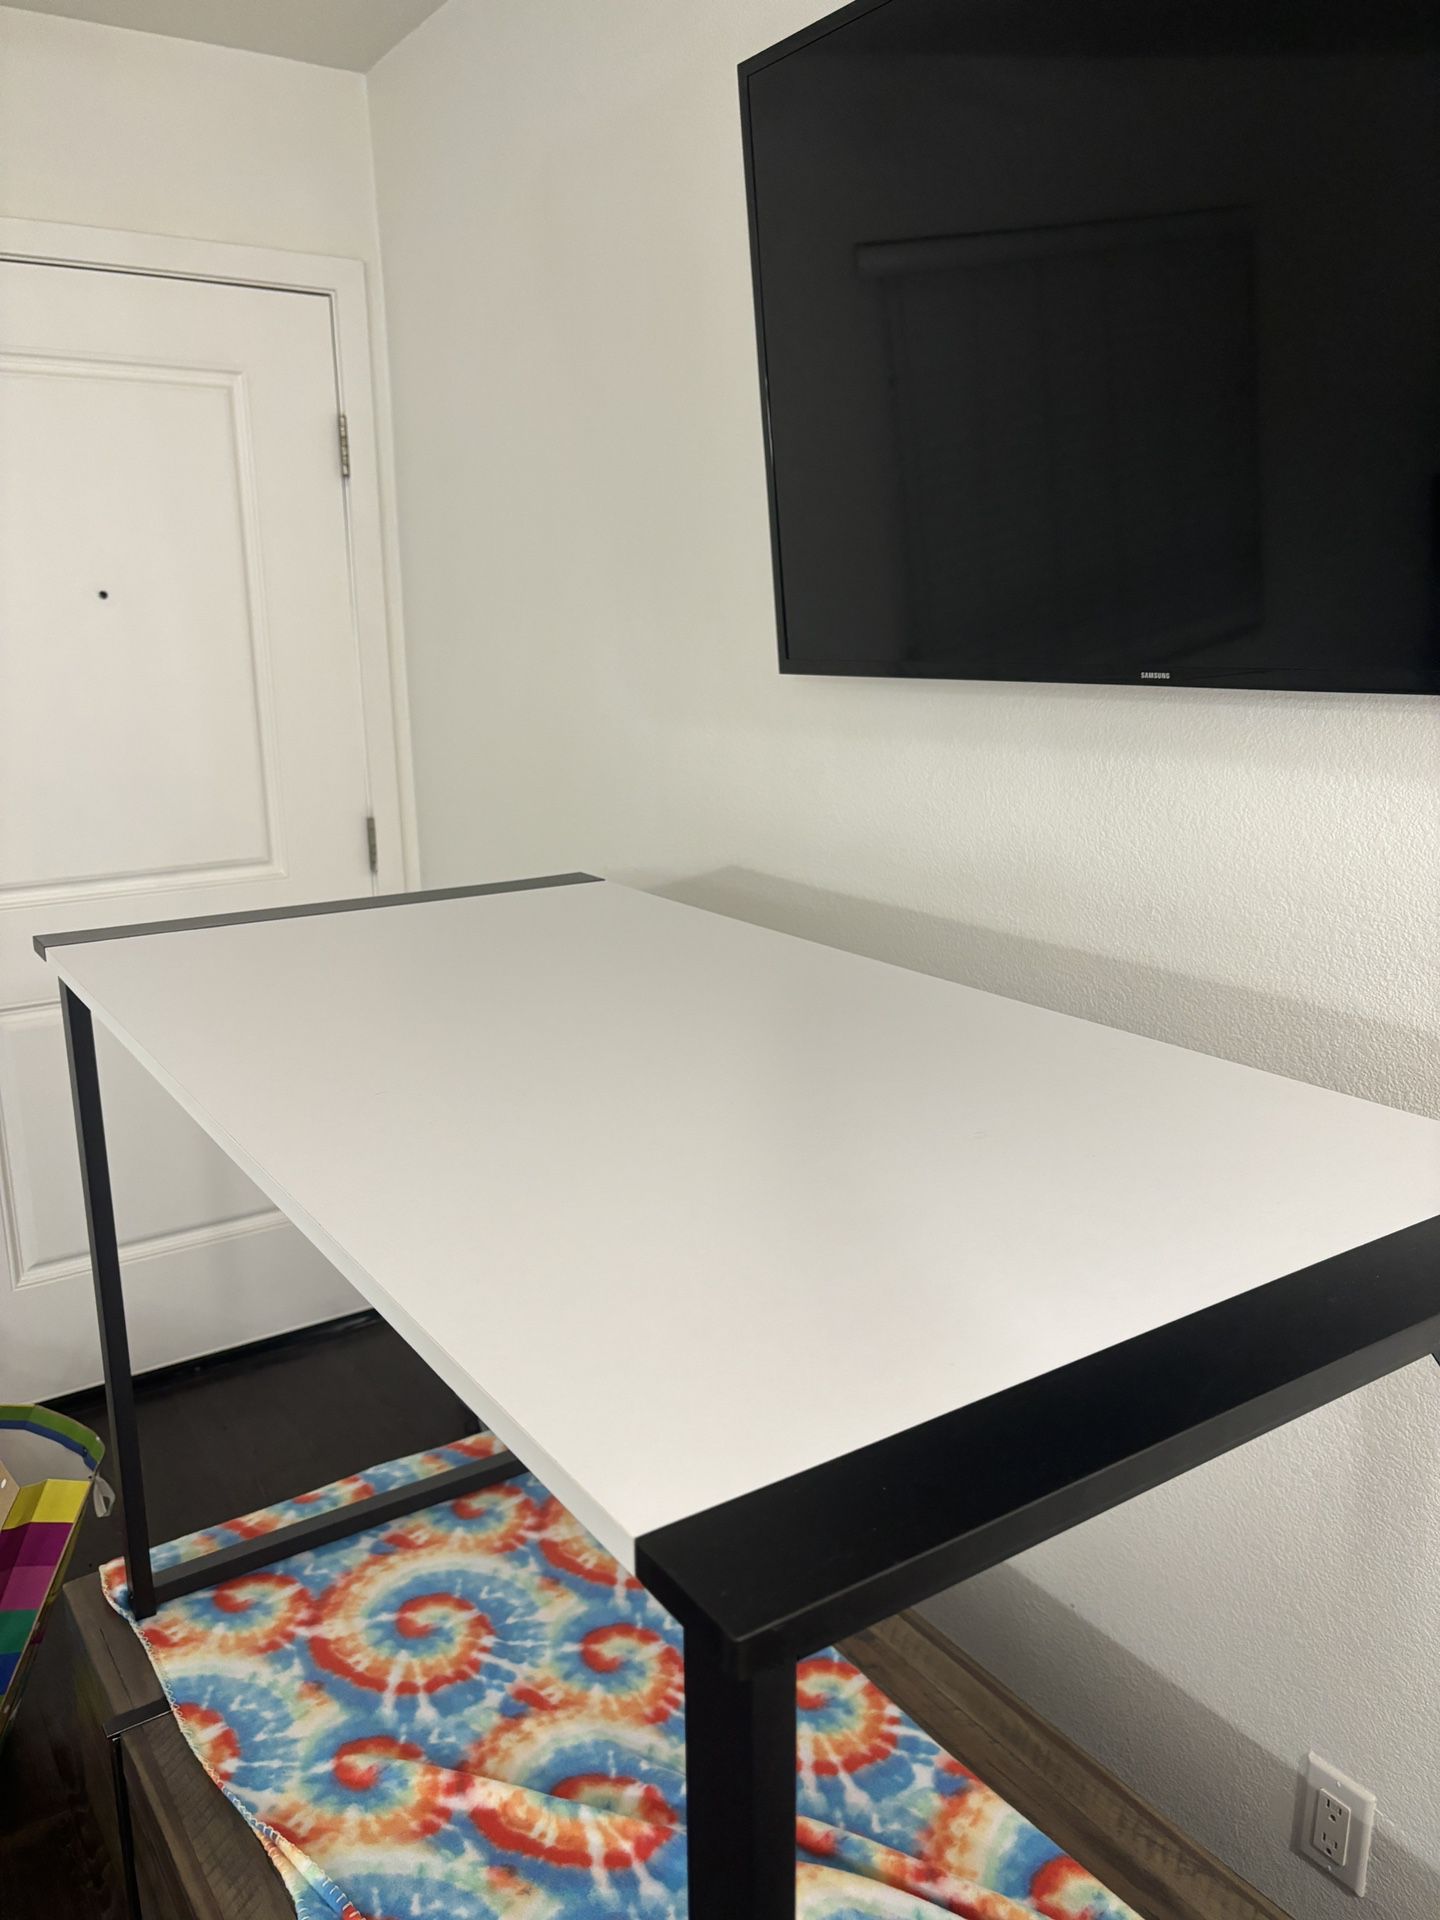 Computer Desk  Need It Gone Today (48” length x 24” depth x 29” tall)